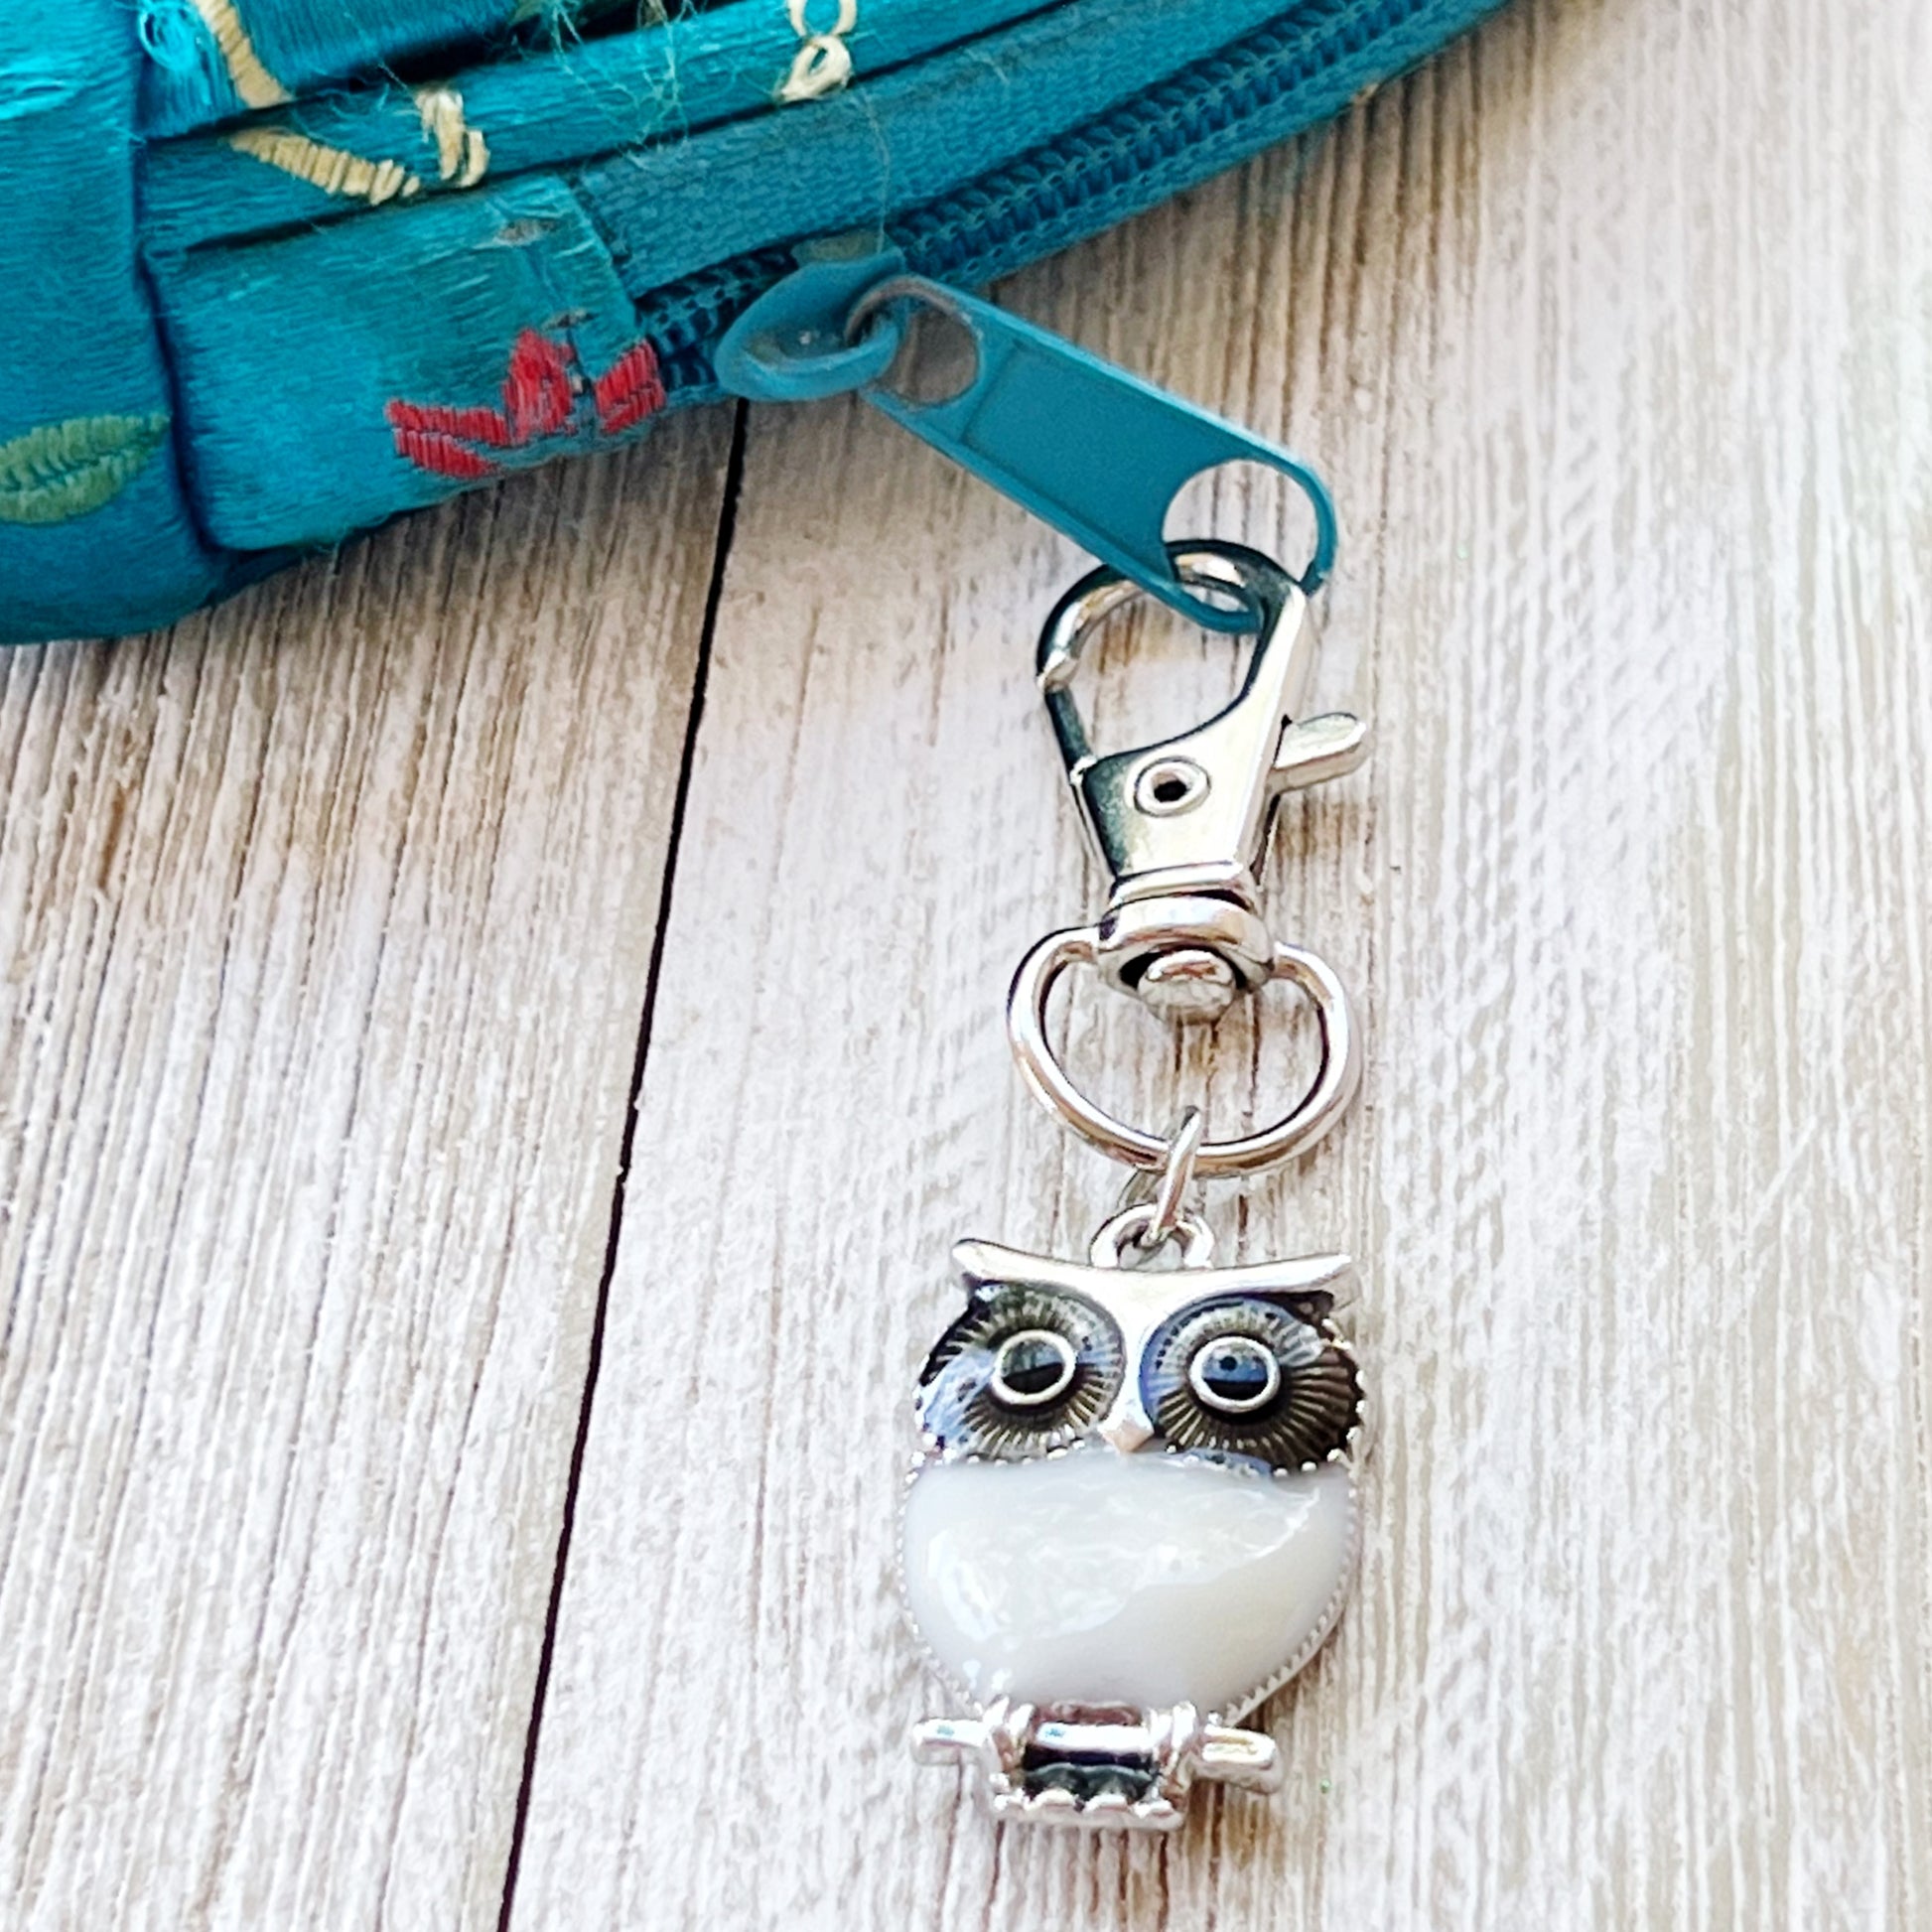 Vibrant Multi-Colored Owl Zipper Pull Keychain Purse Charms - Whimsical Accessories